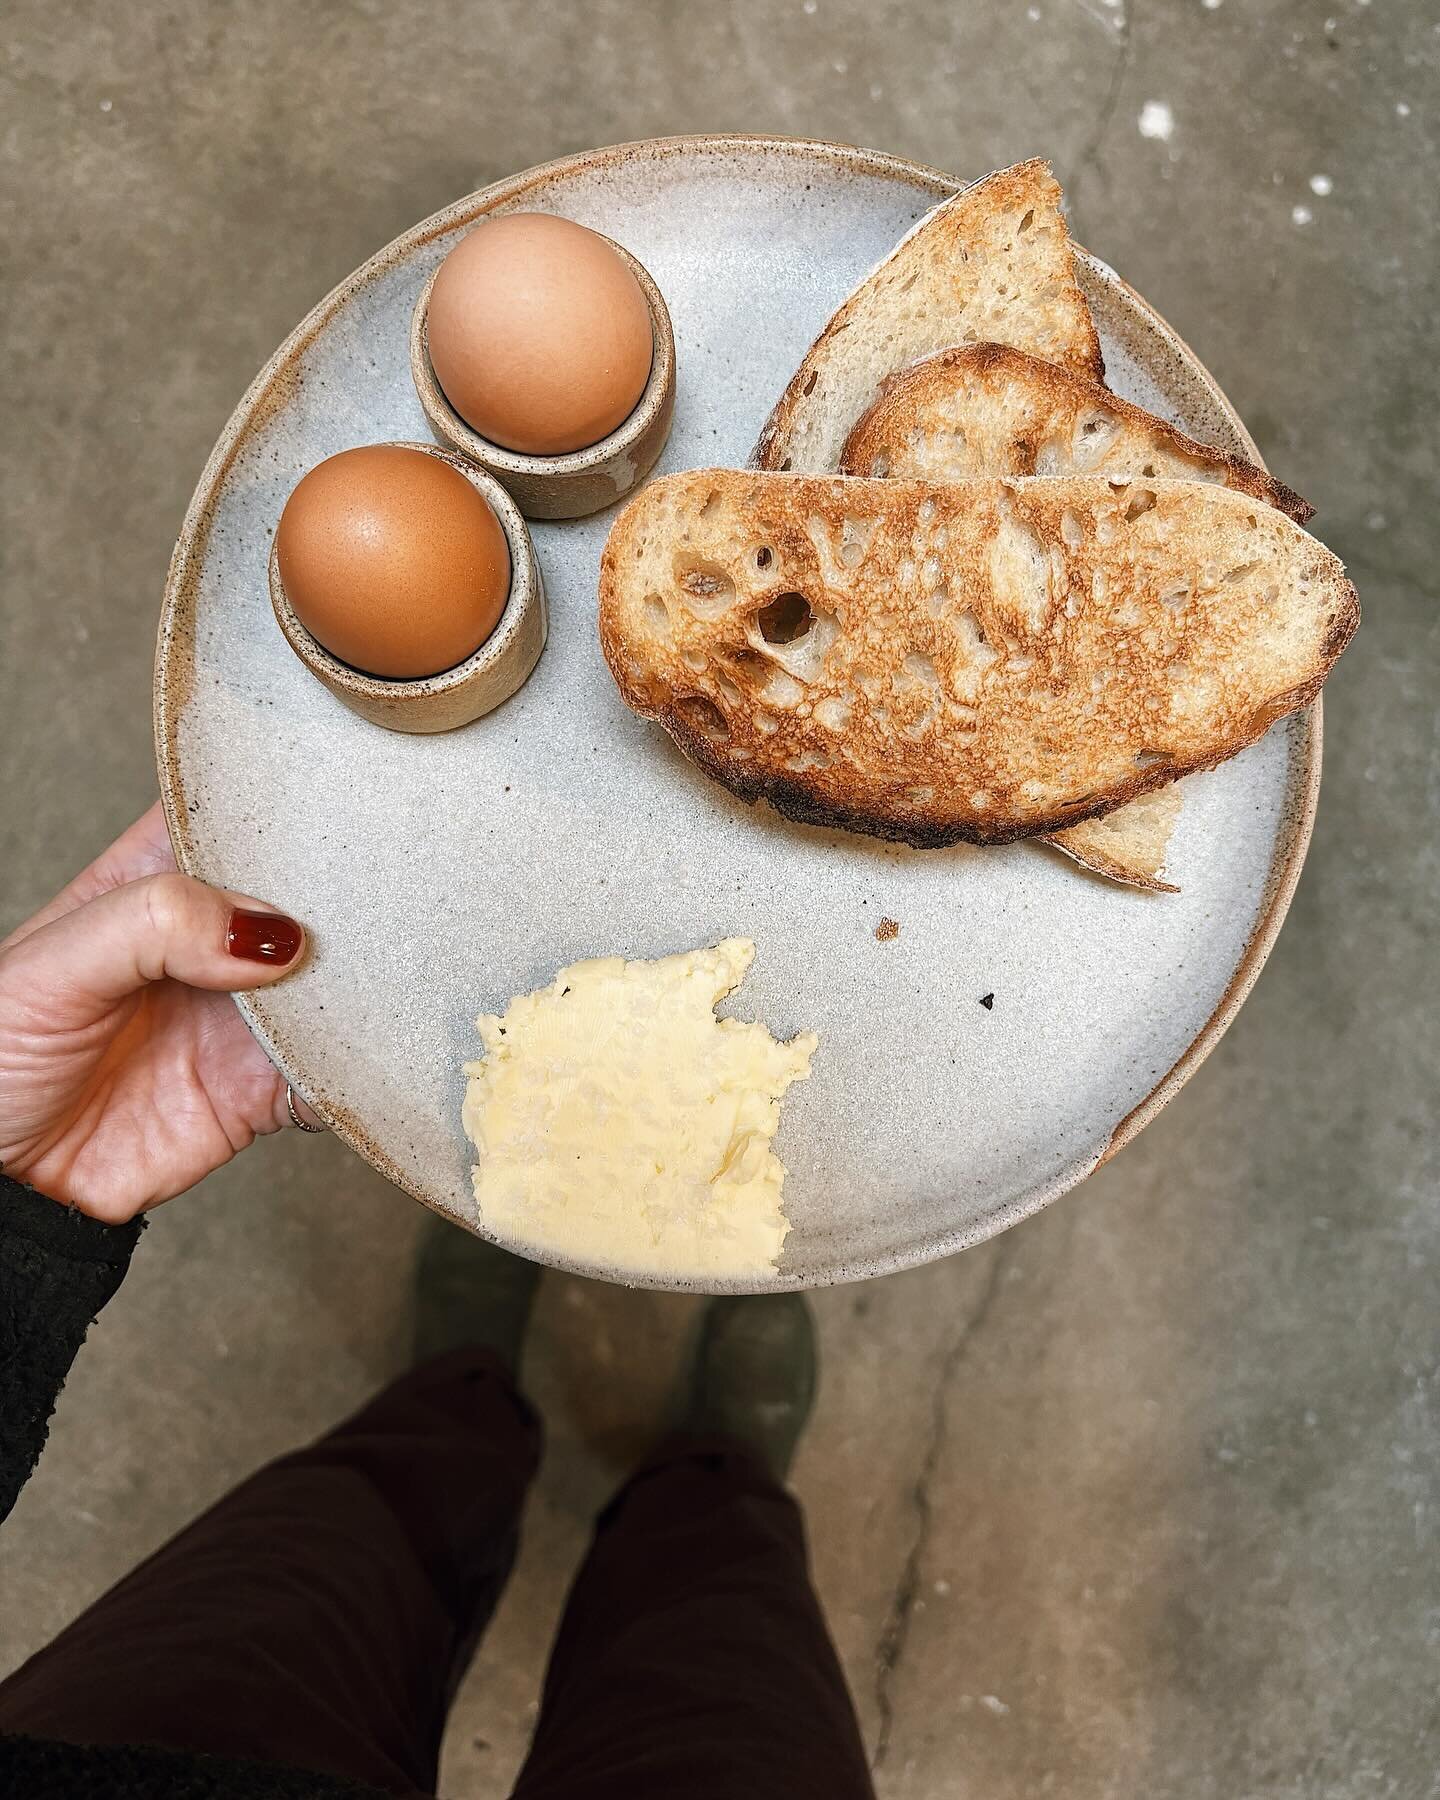 Such a lovely breakfast buzz this morning&hellip; Shannon @pots_and_paper popped in with our gorgeous new bowls and egg cups&hellip; We have boiled eggs and soldiers on the new breakfast menu along with croissants filled with trout and organic leaves